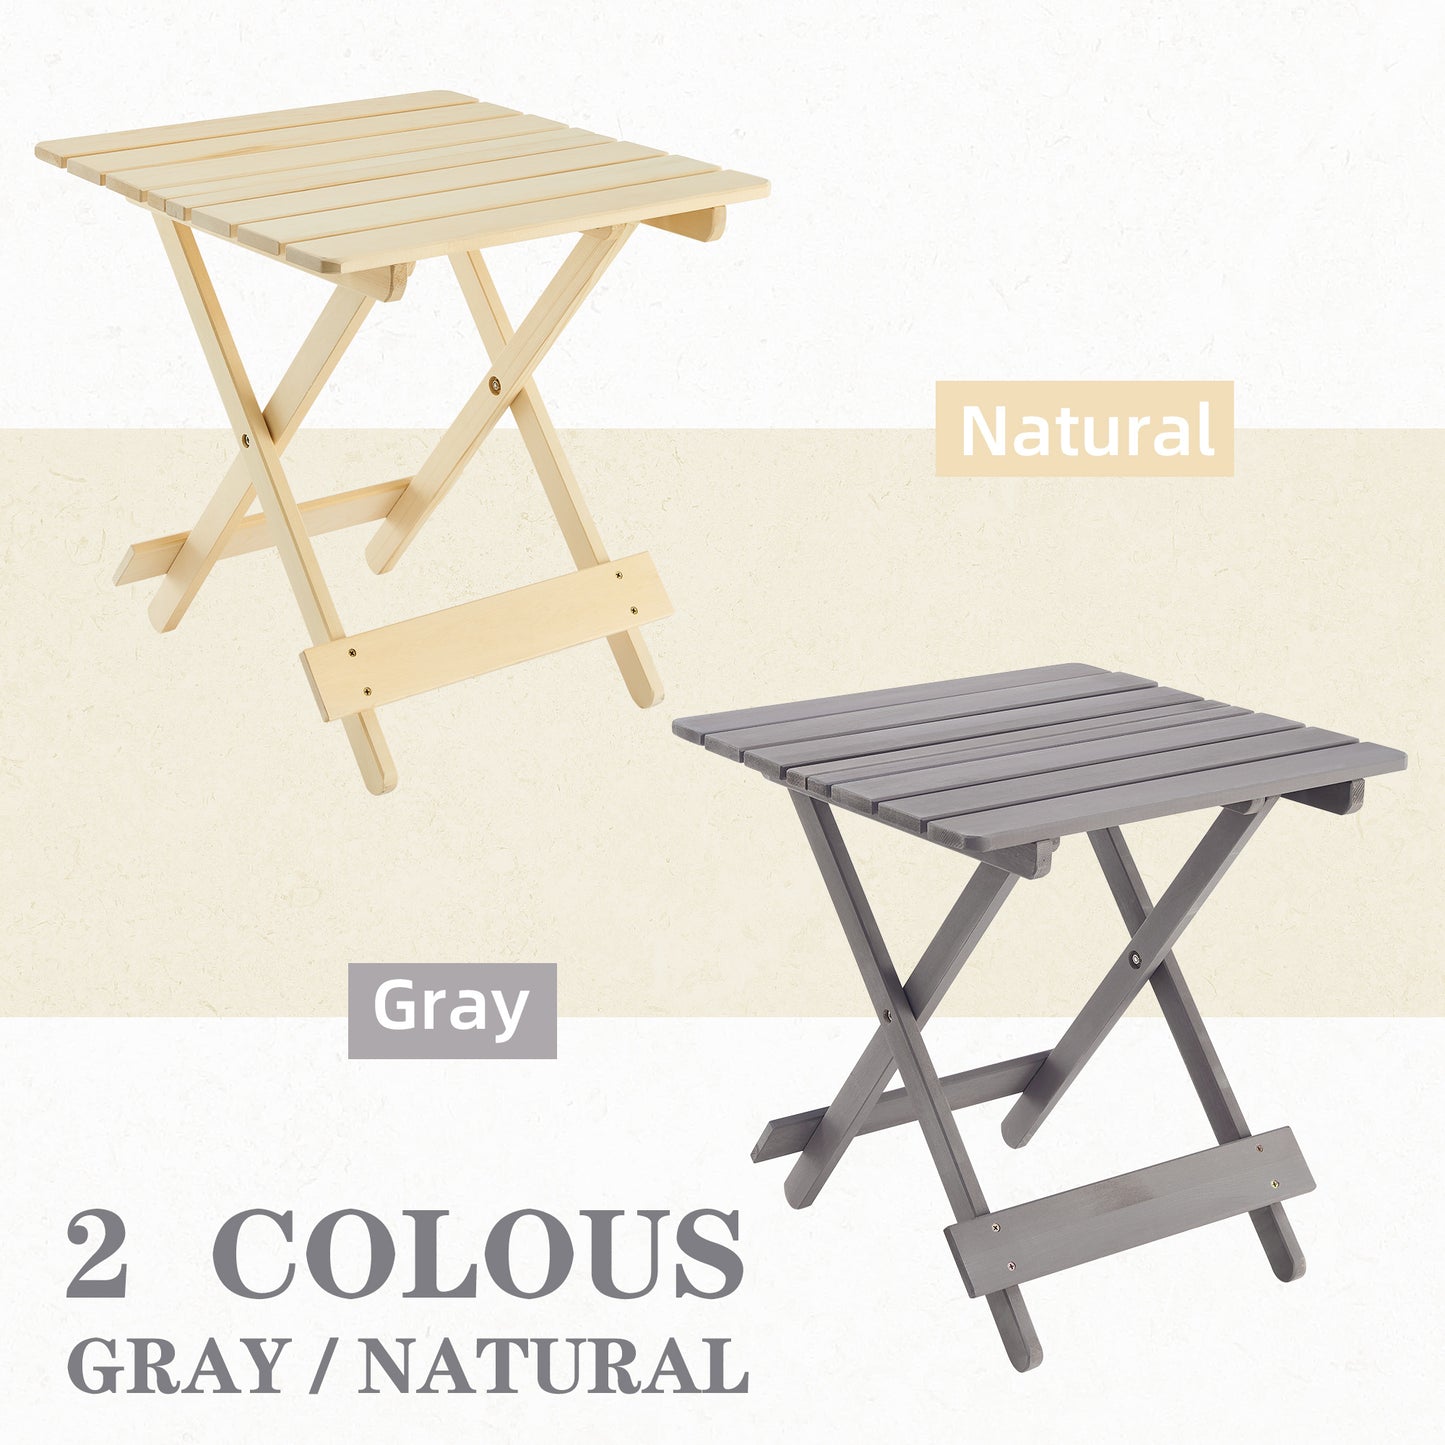 Outdoor Wooden Folding Table (gray)